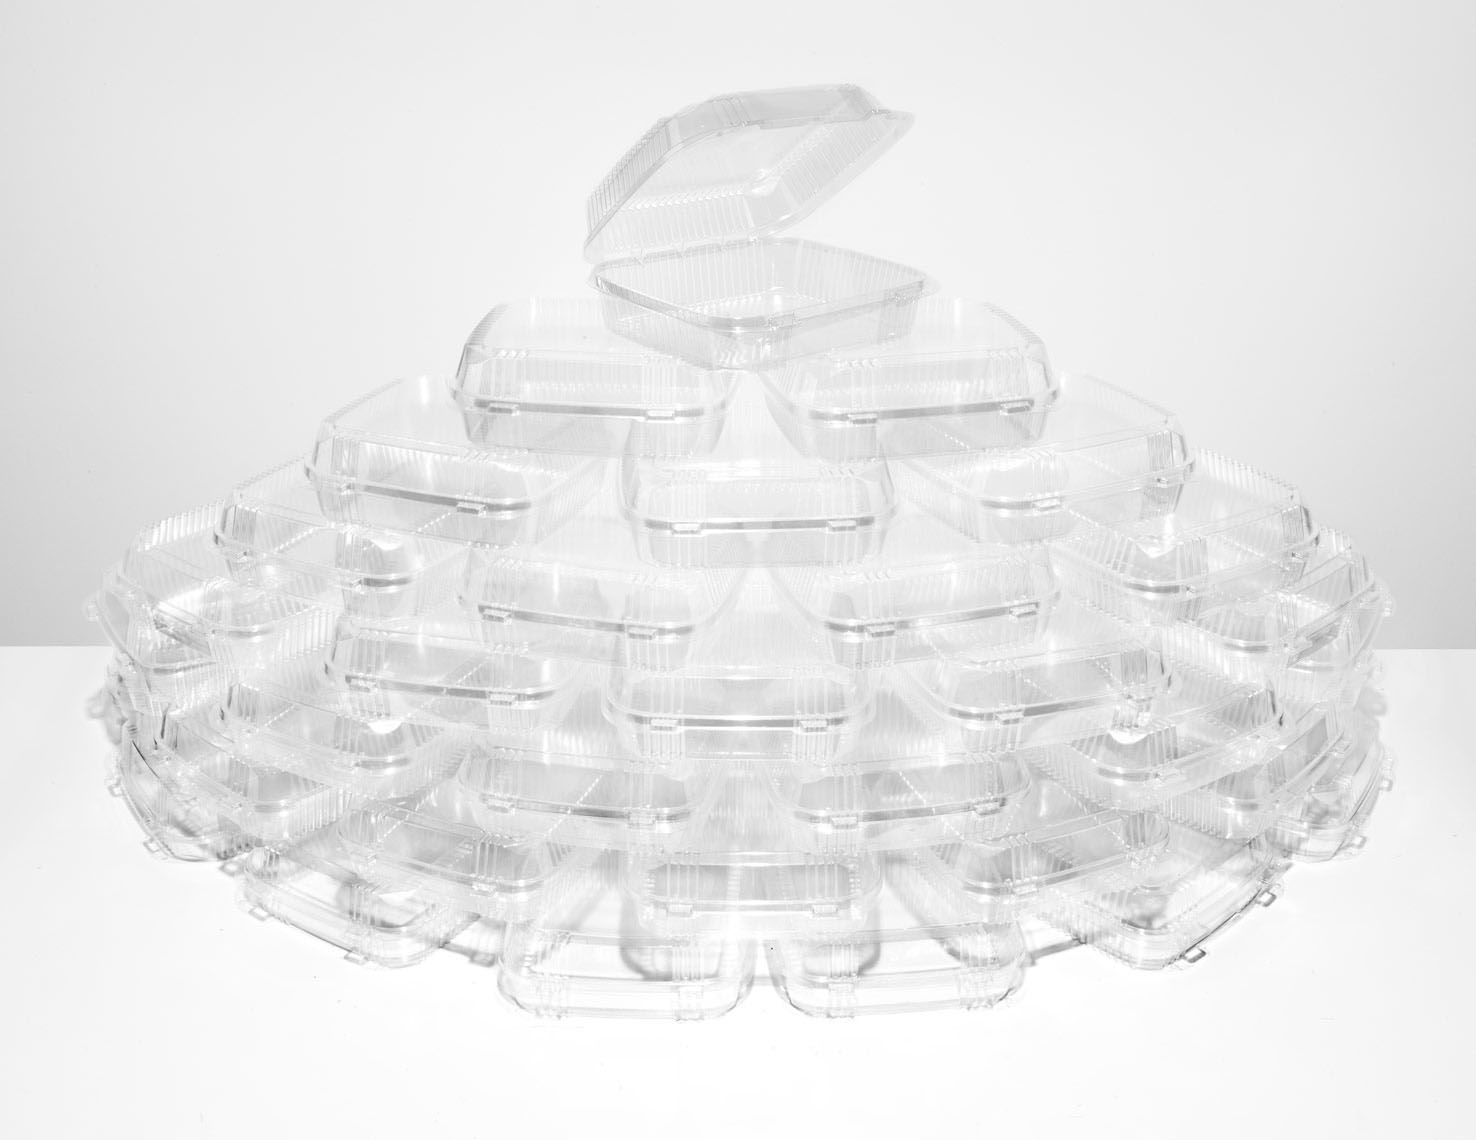 plastic clamshell for take out food arraign in a circular stack